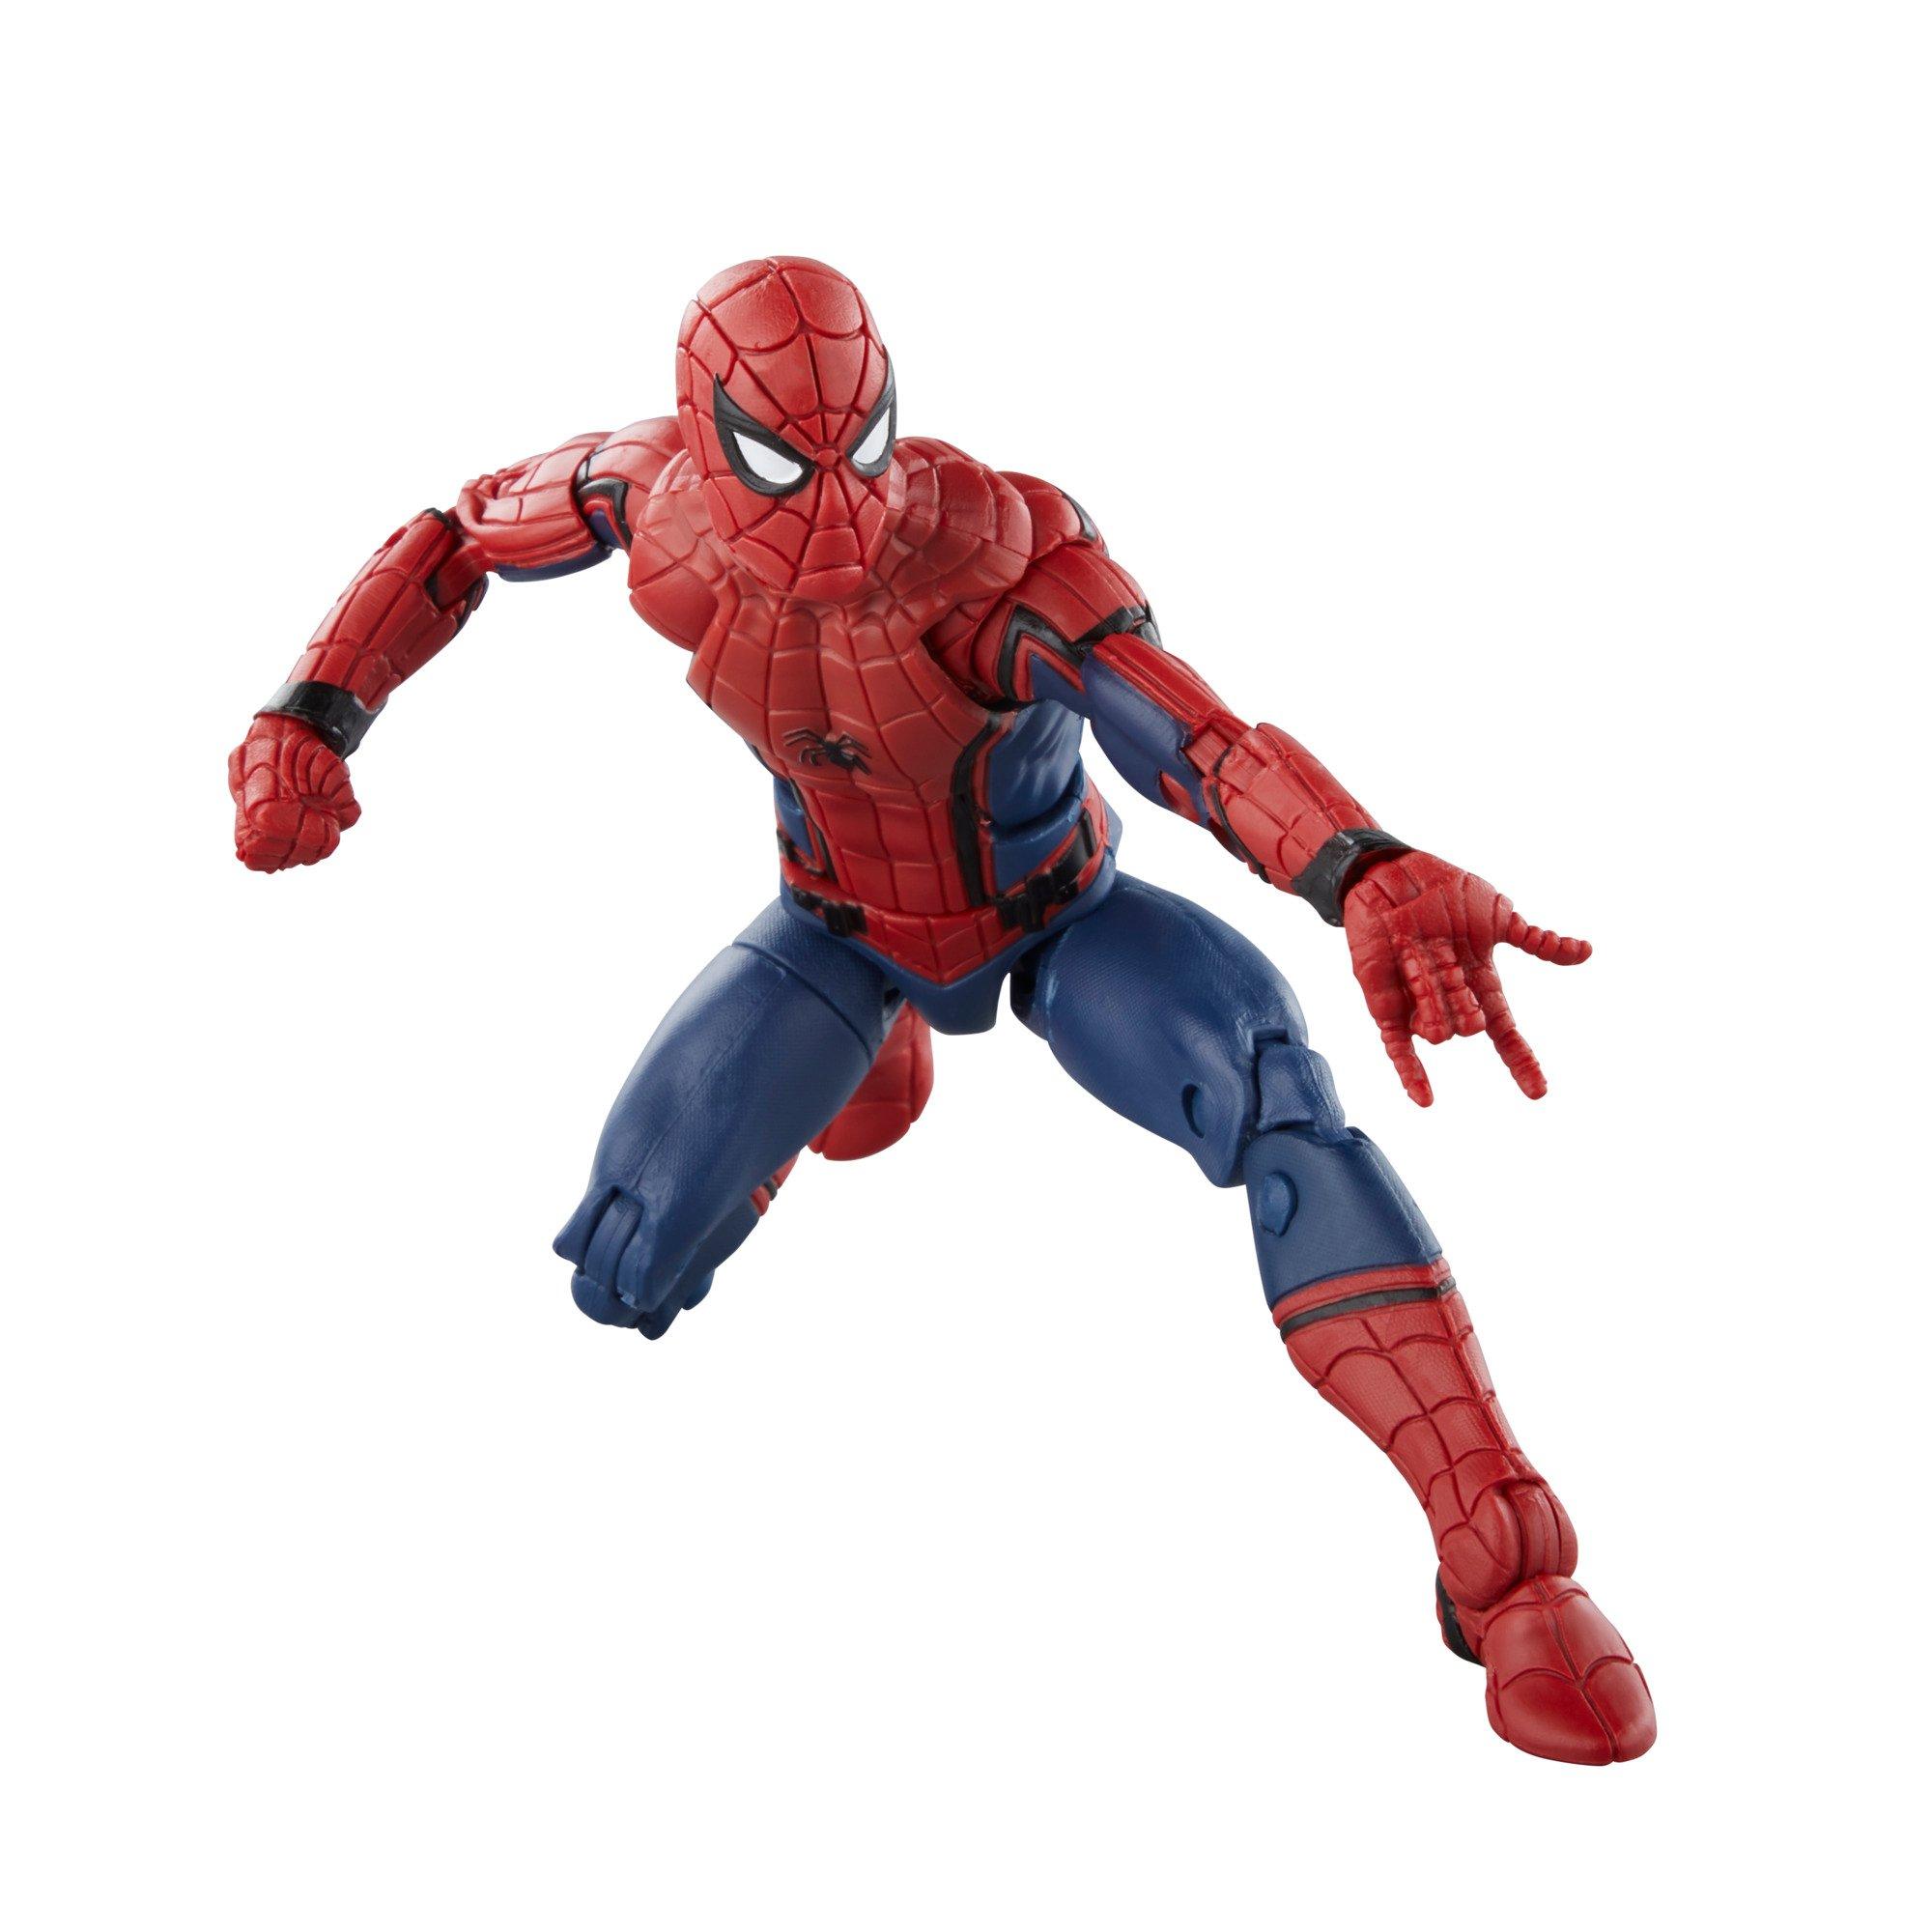 Spider-Man Homecoming - Statuette Premier Collection Spider-Man 30